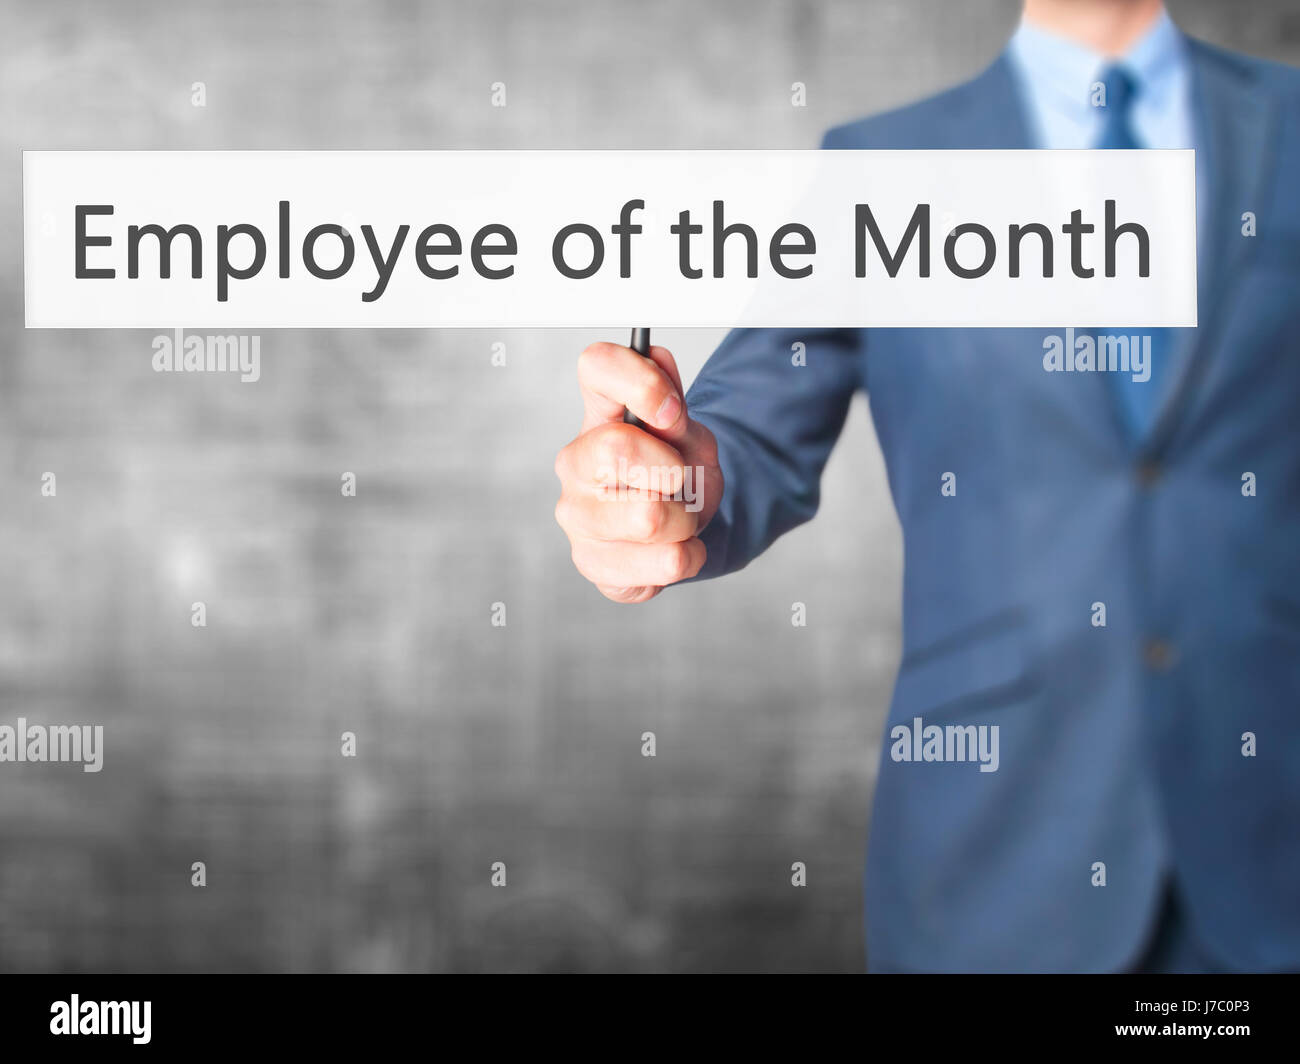 Employee of the Month - Businessman hand holding sign. Business, technology, internet concept. Stock Photo Stock Photo